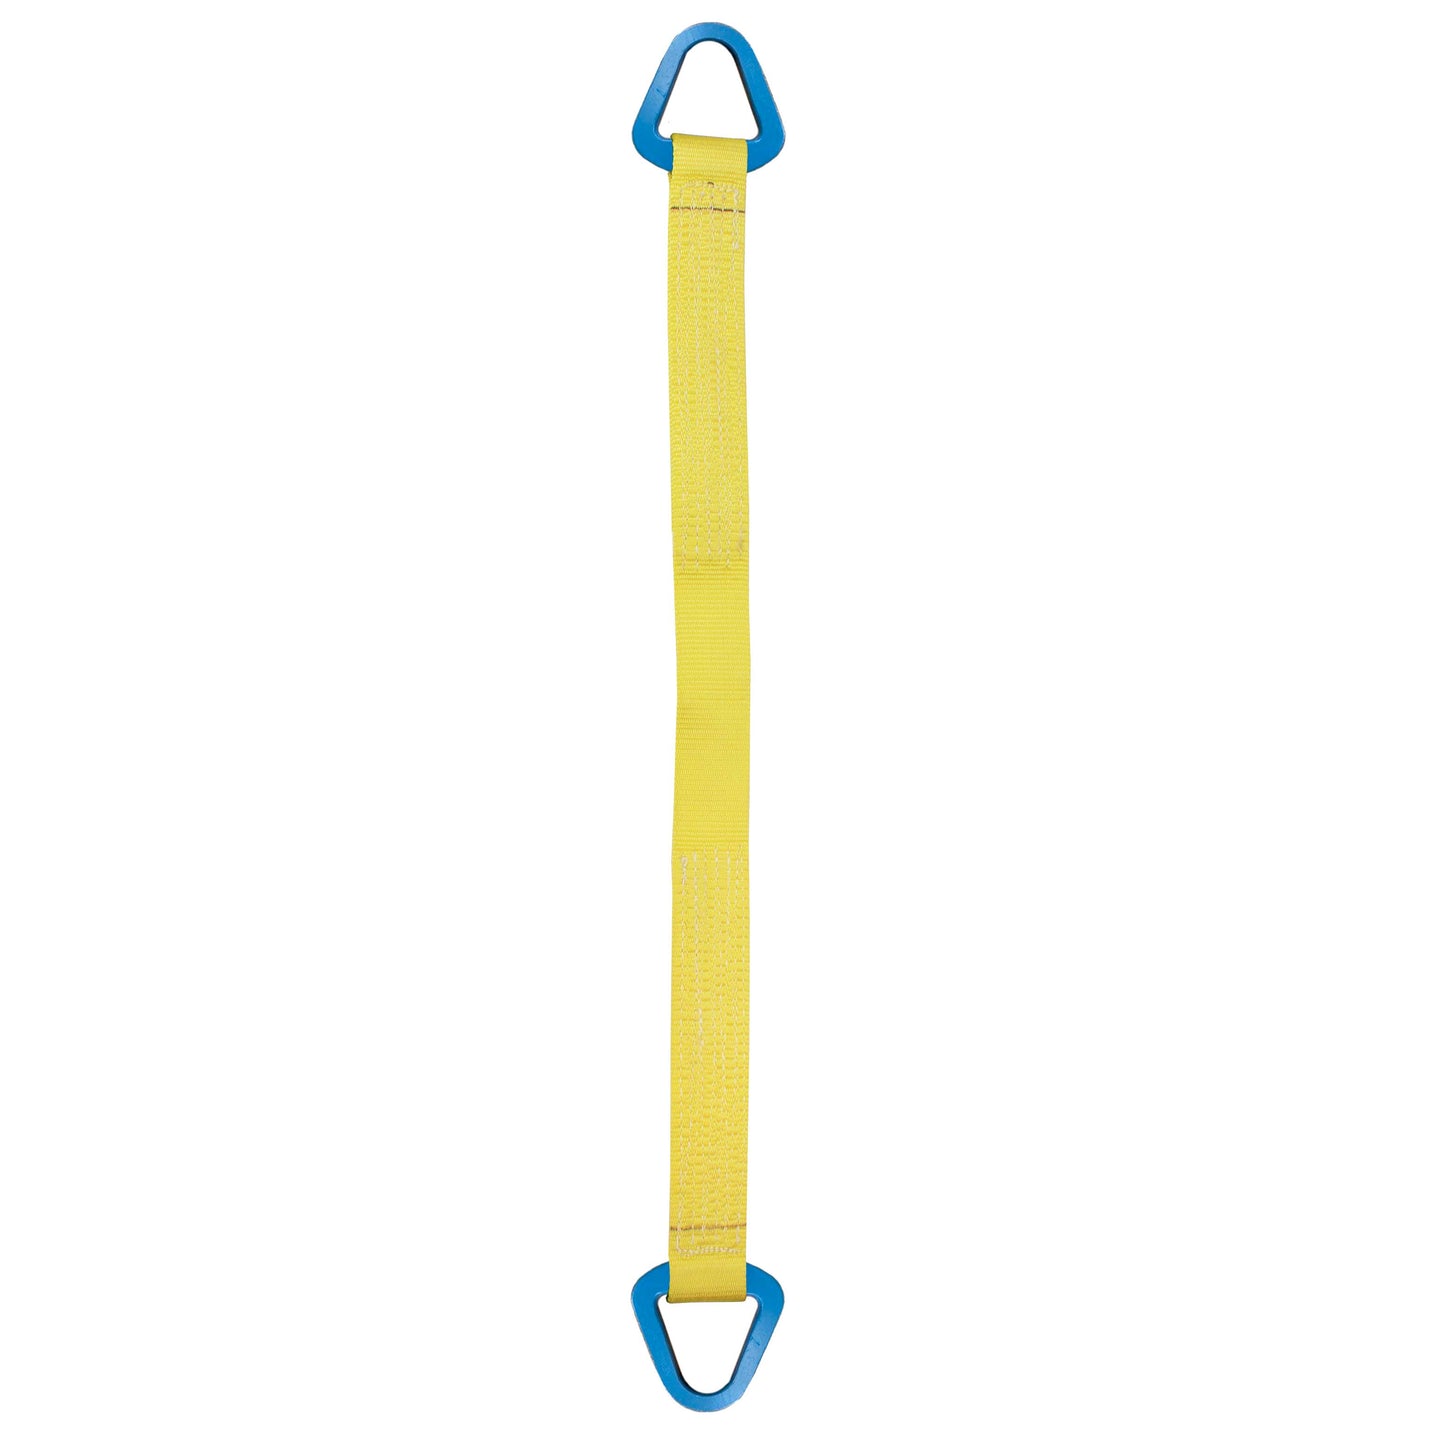 Nylon Lifting Sling Triangle 8 inch x 3 foot 2ply image 1 of 2